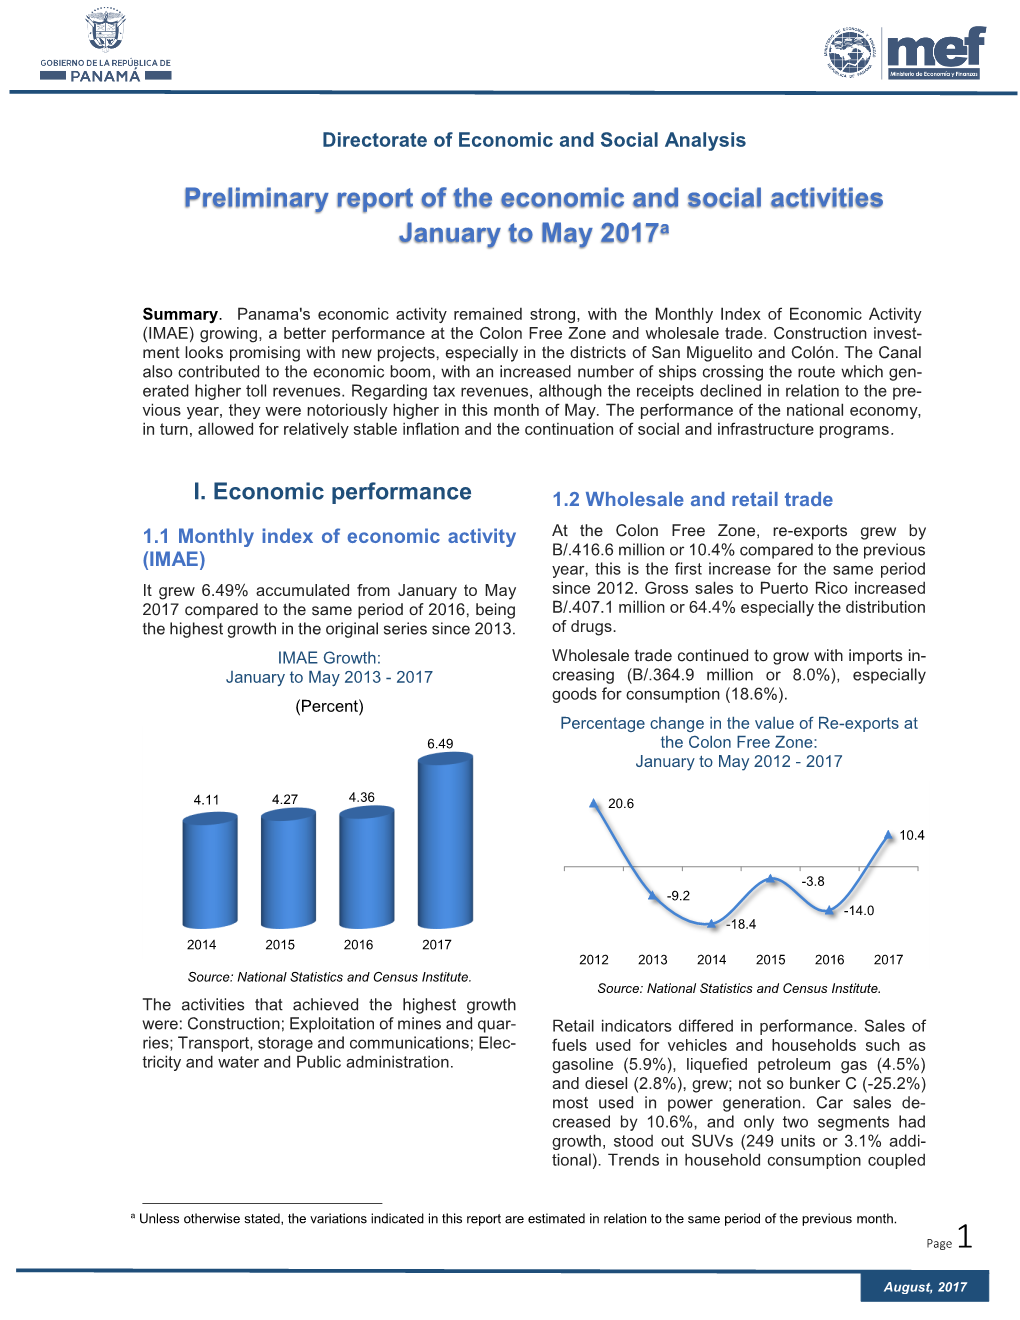 Preliminary Report of the Economic and Social Activities January to May 2017A